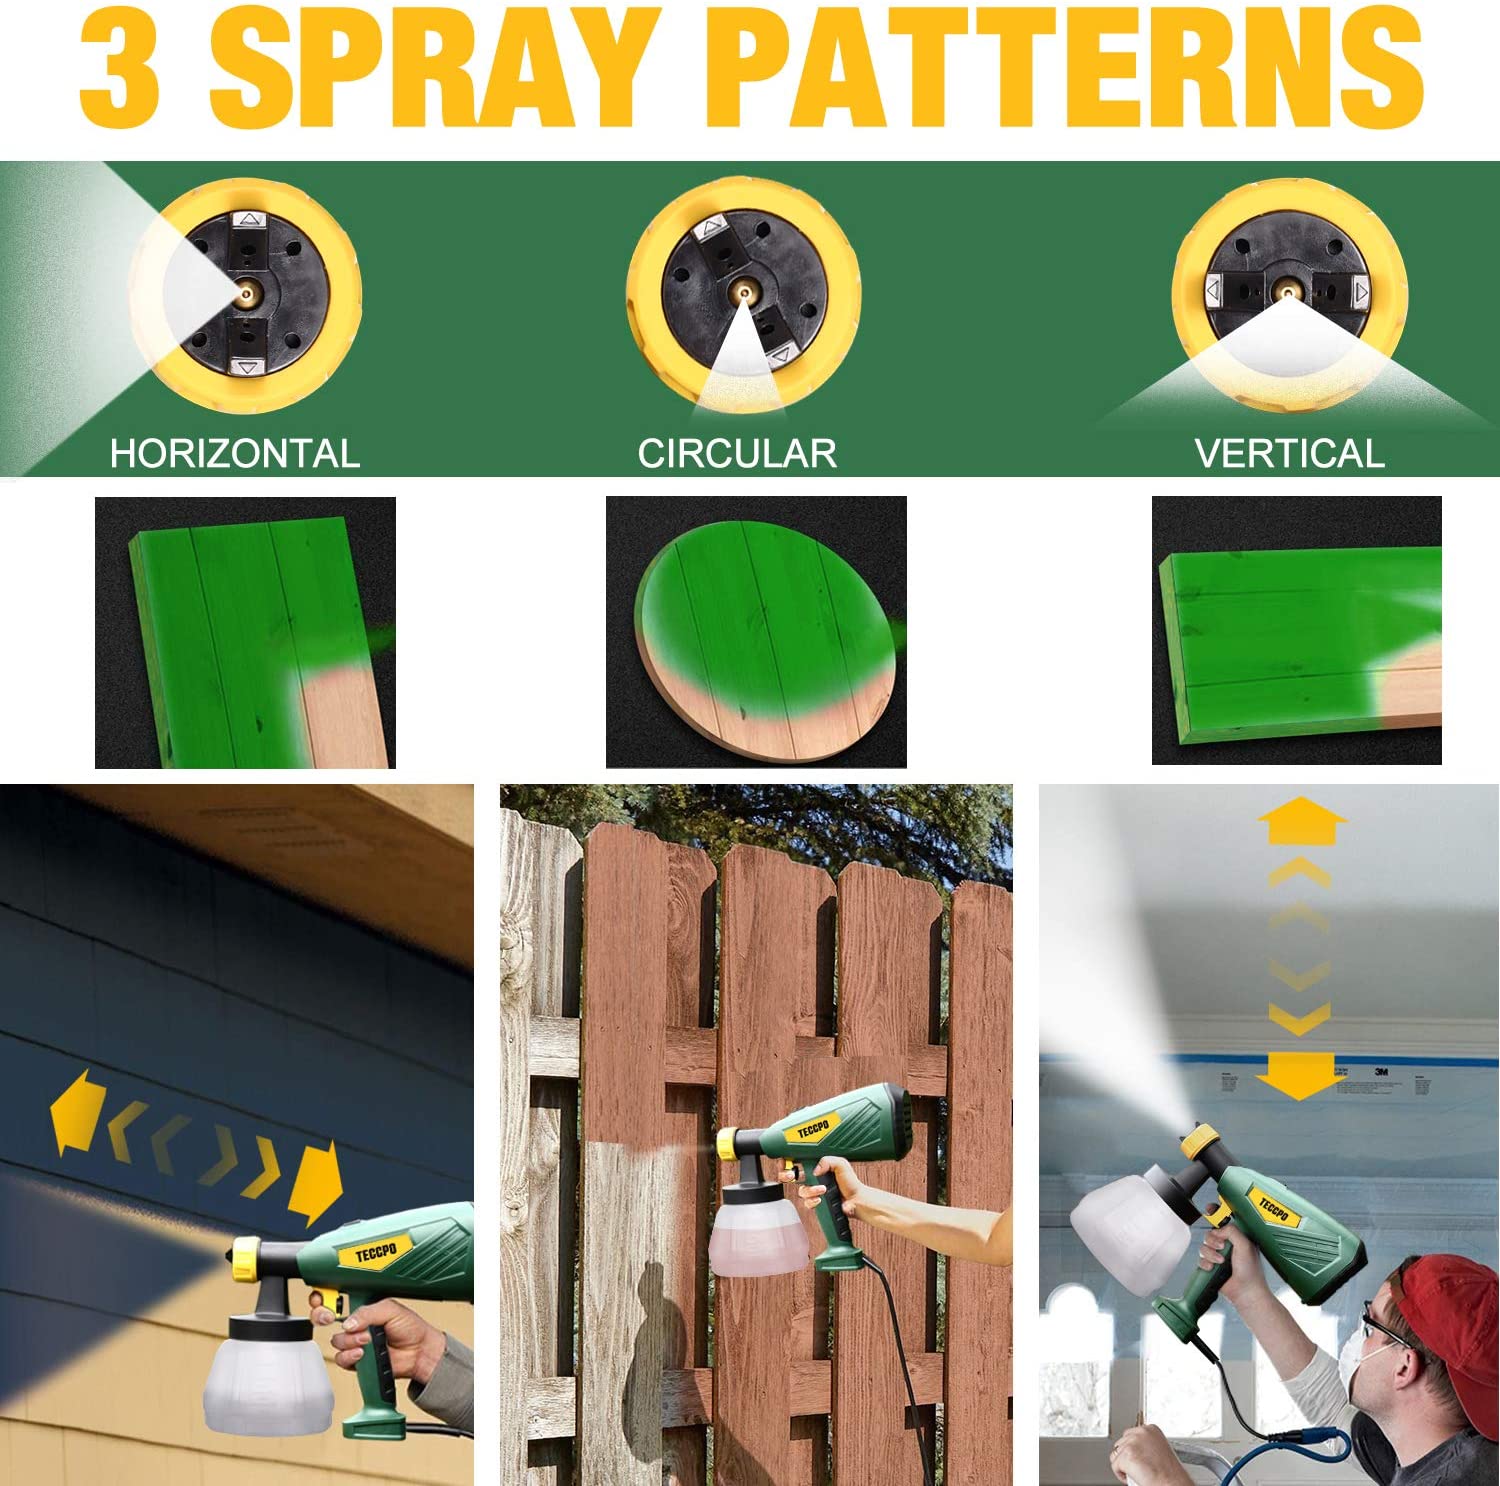 TECCPO Paint Sprayer, 4 Nozzles Sizes, 3 Spray Patterns, 1300ml Detachable Container, Great Finish - image 3 of 6